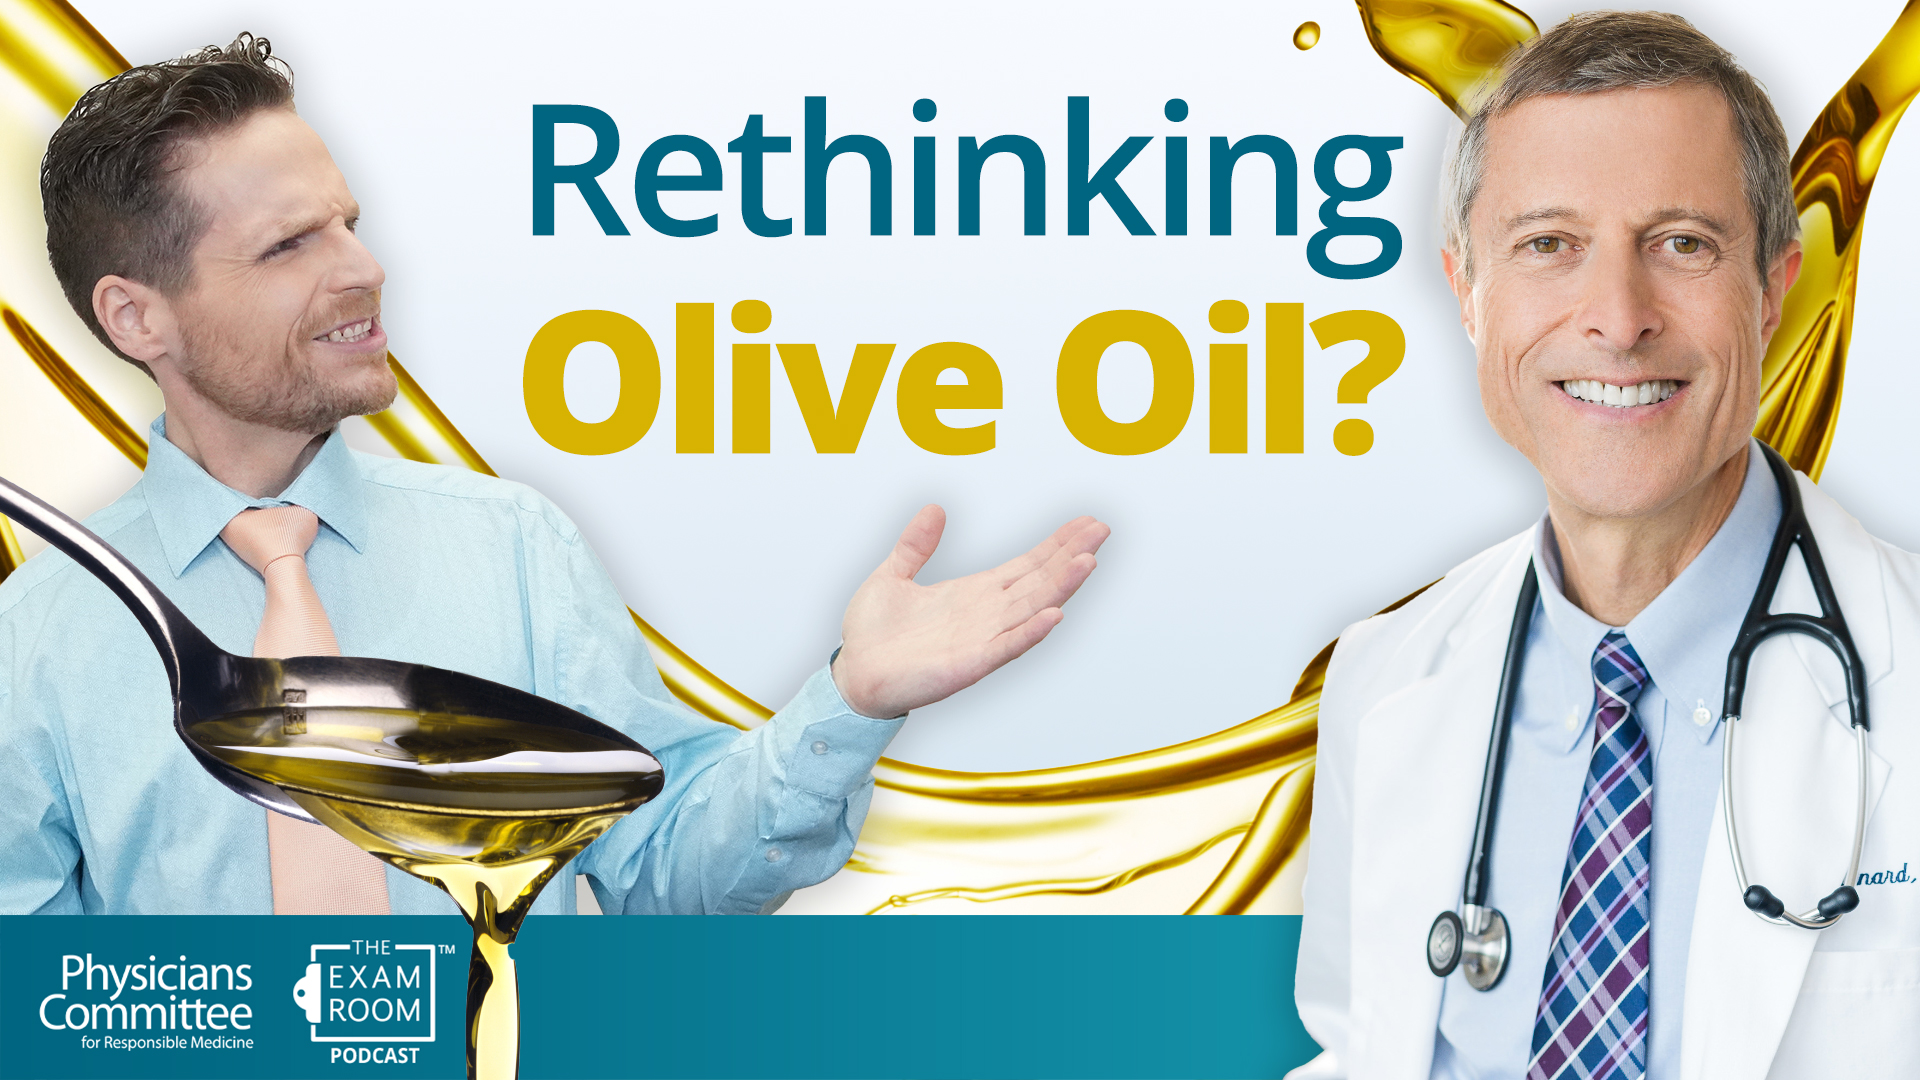 The Exam Room Podcast: Rethinking Olive Oil?